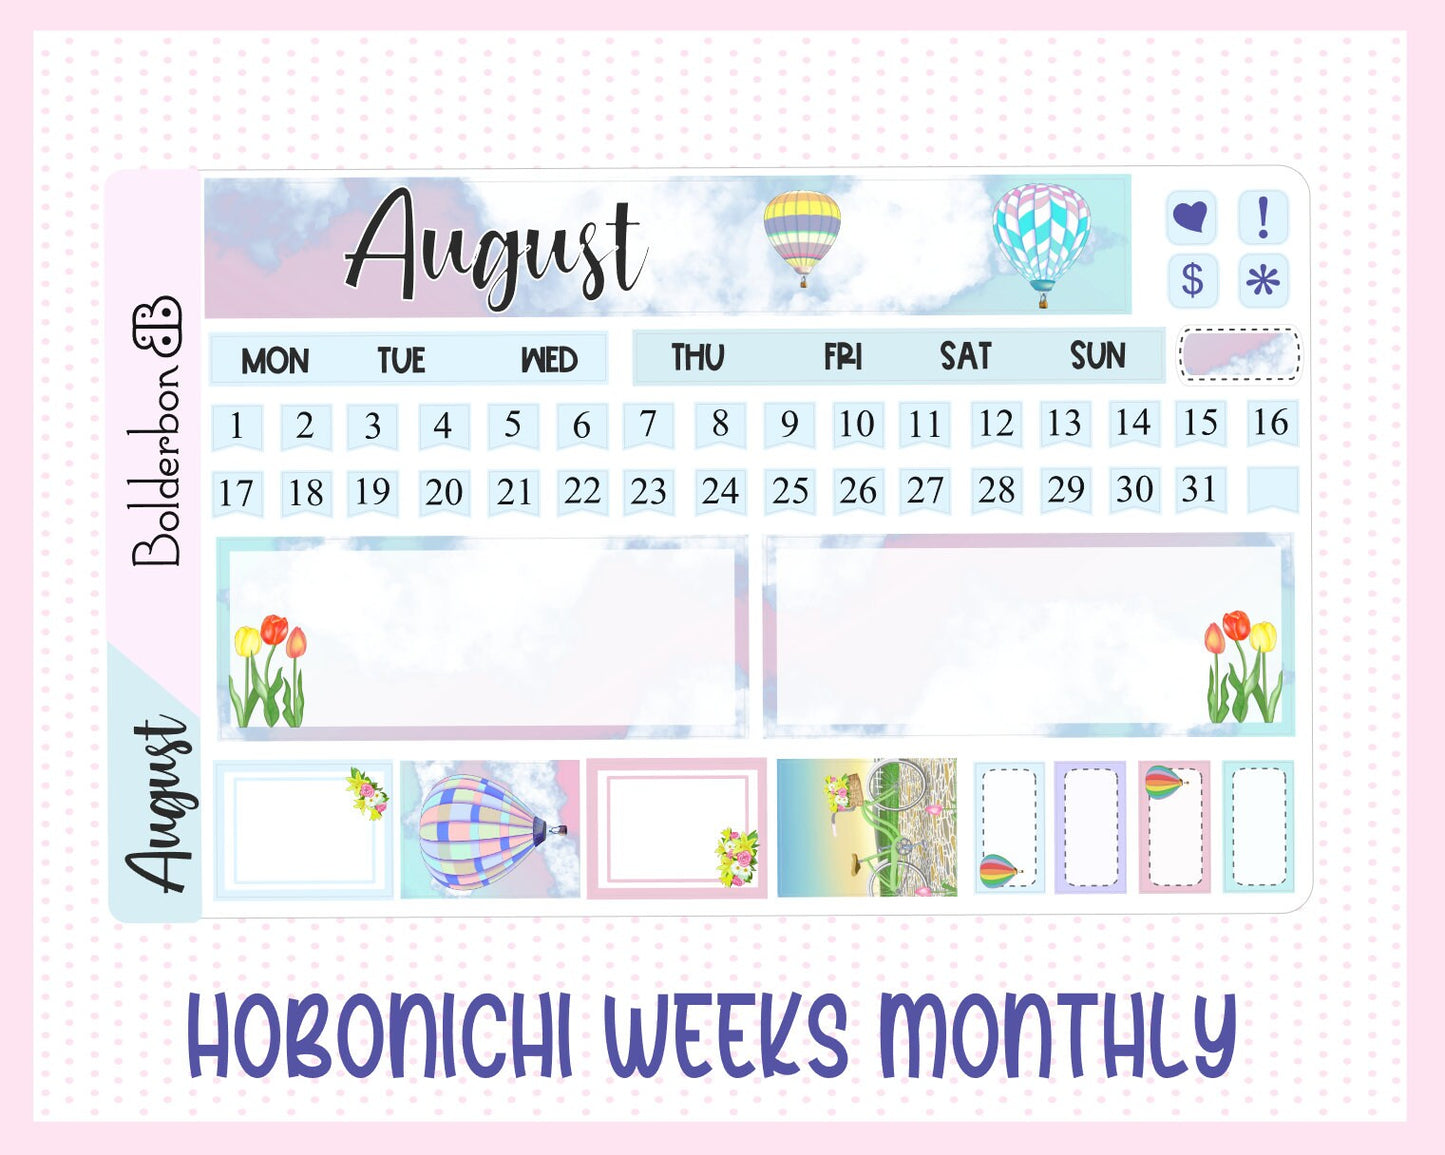 AUGUST Hobonichi Weeks Sticker Kit || Hand Drawn Hot Air Balloon Monthly Planner Stickers for Hobo Weeks